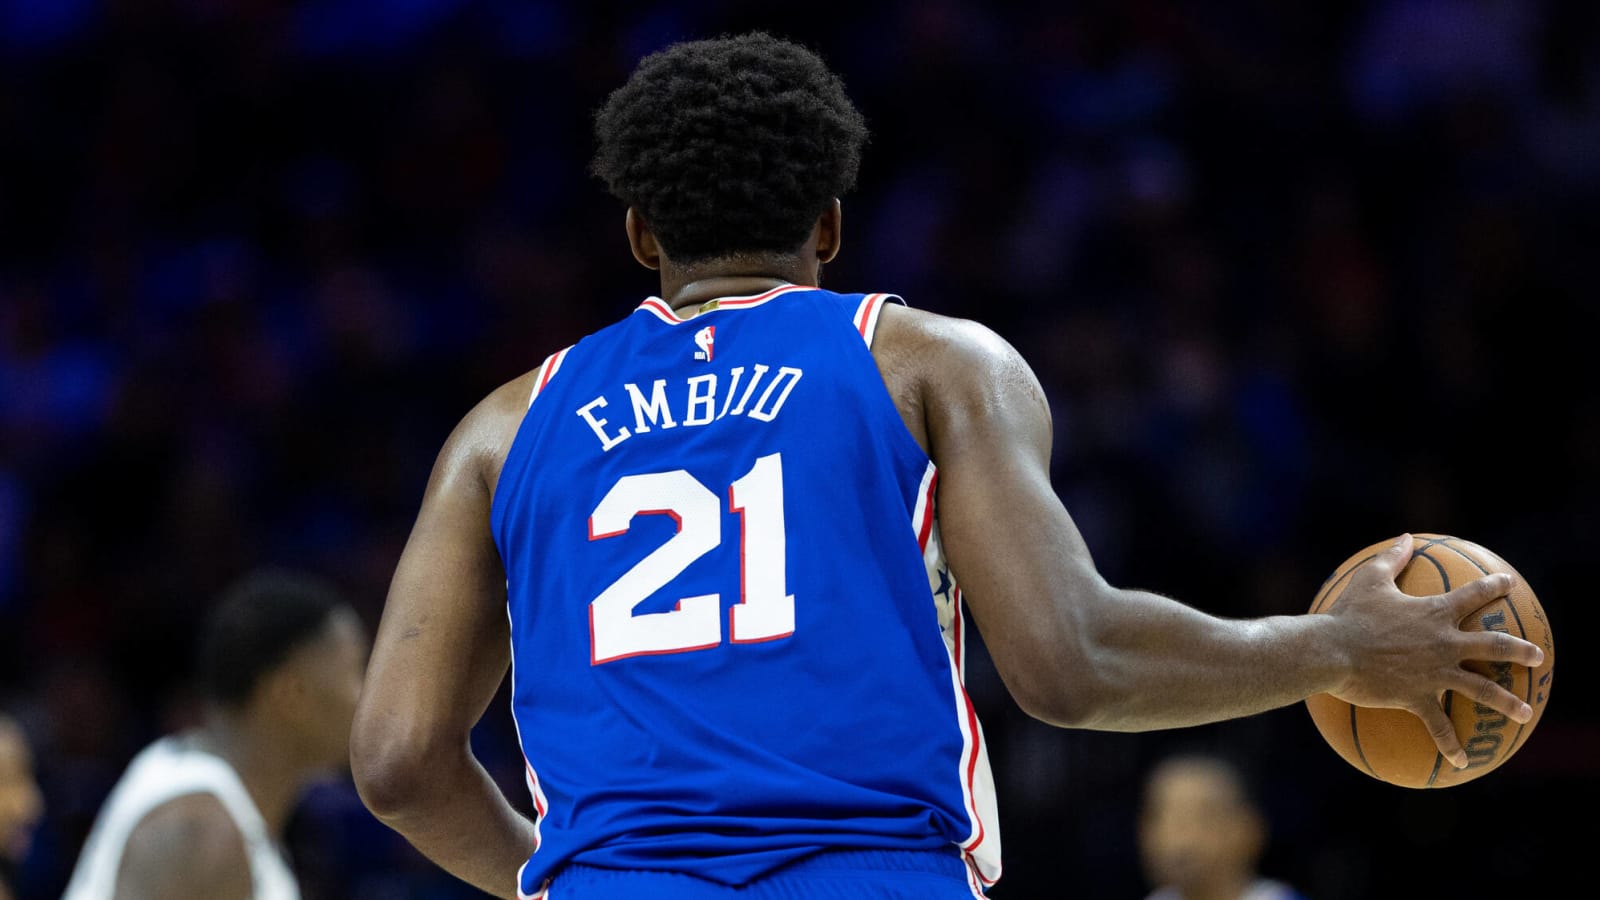 Report: Joel Embiid knee injury more serious than thought